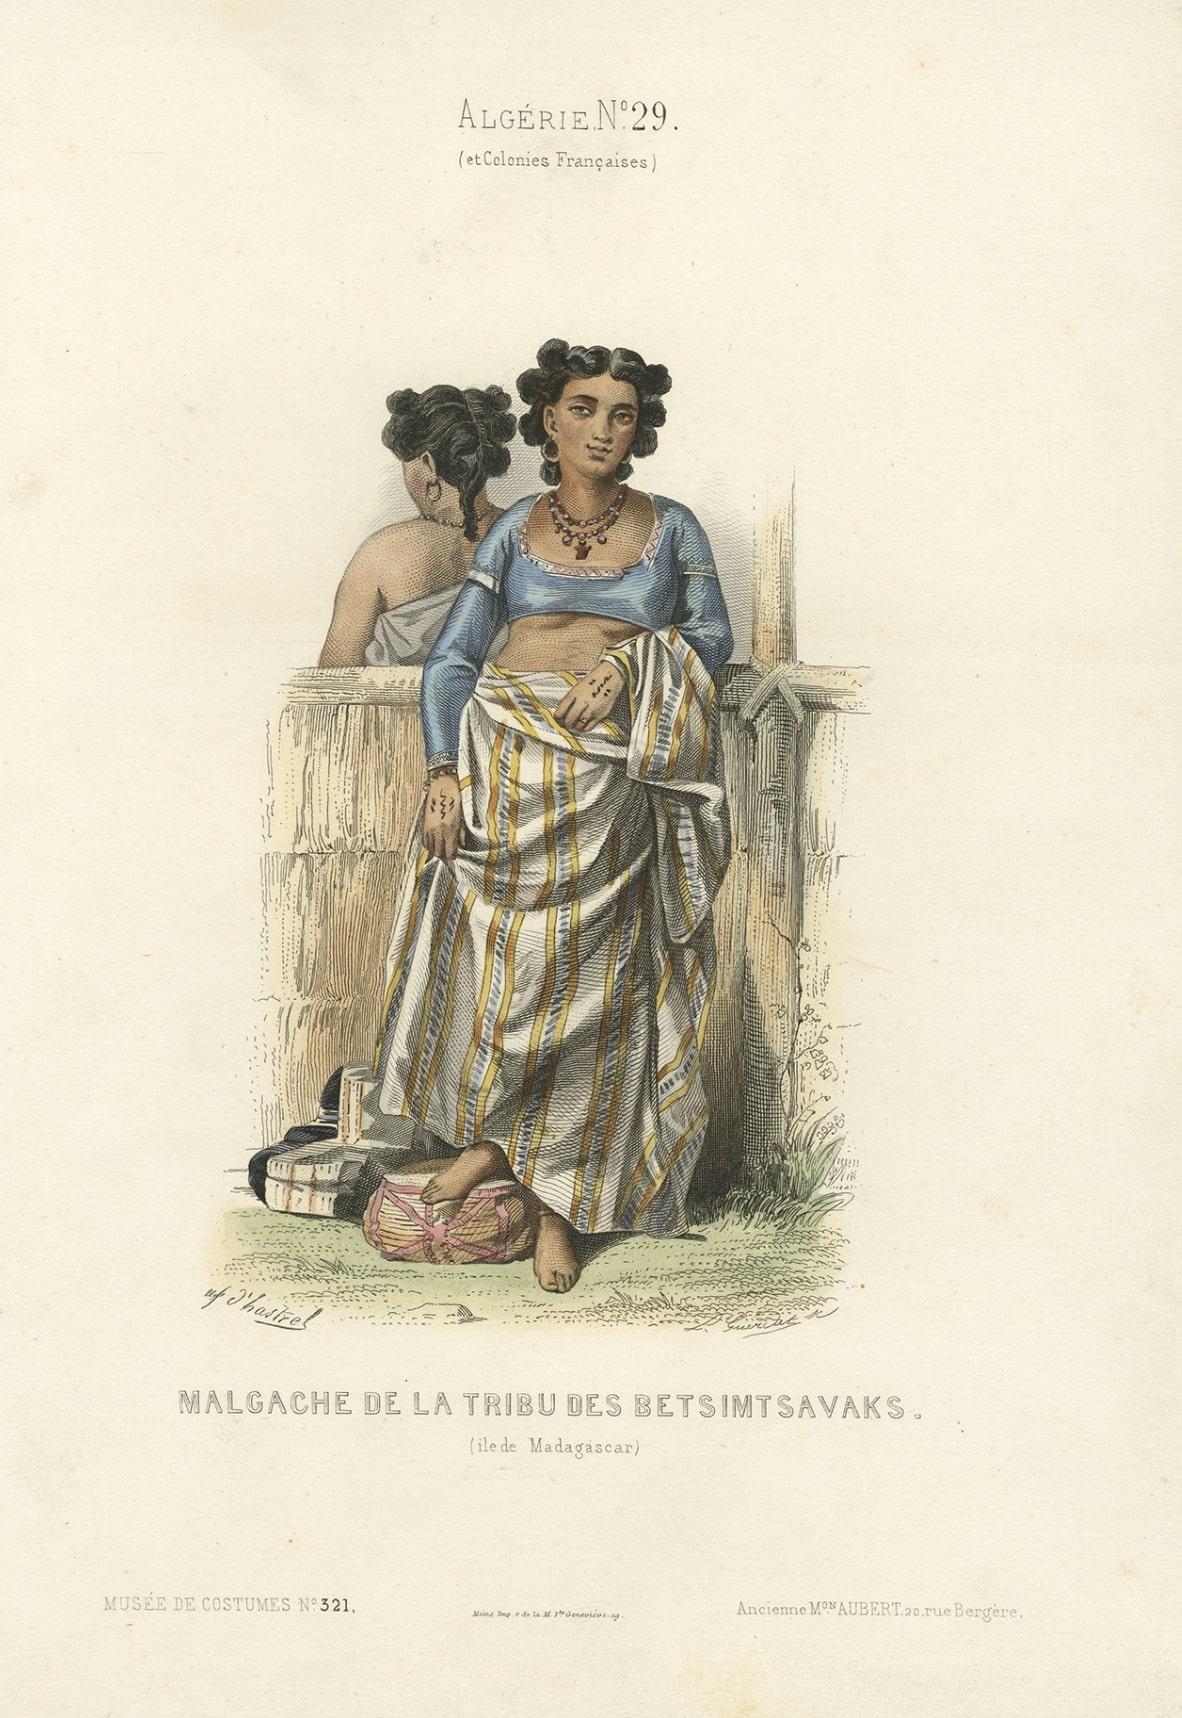 Paper Rare Print of a Malagasy of the Tribe of Betsimtsavaks, Madagascar, 1850 For Sale